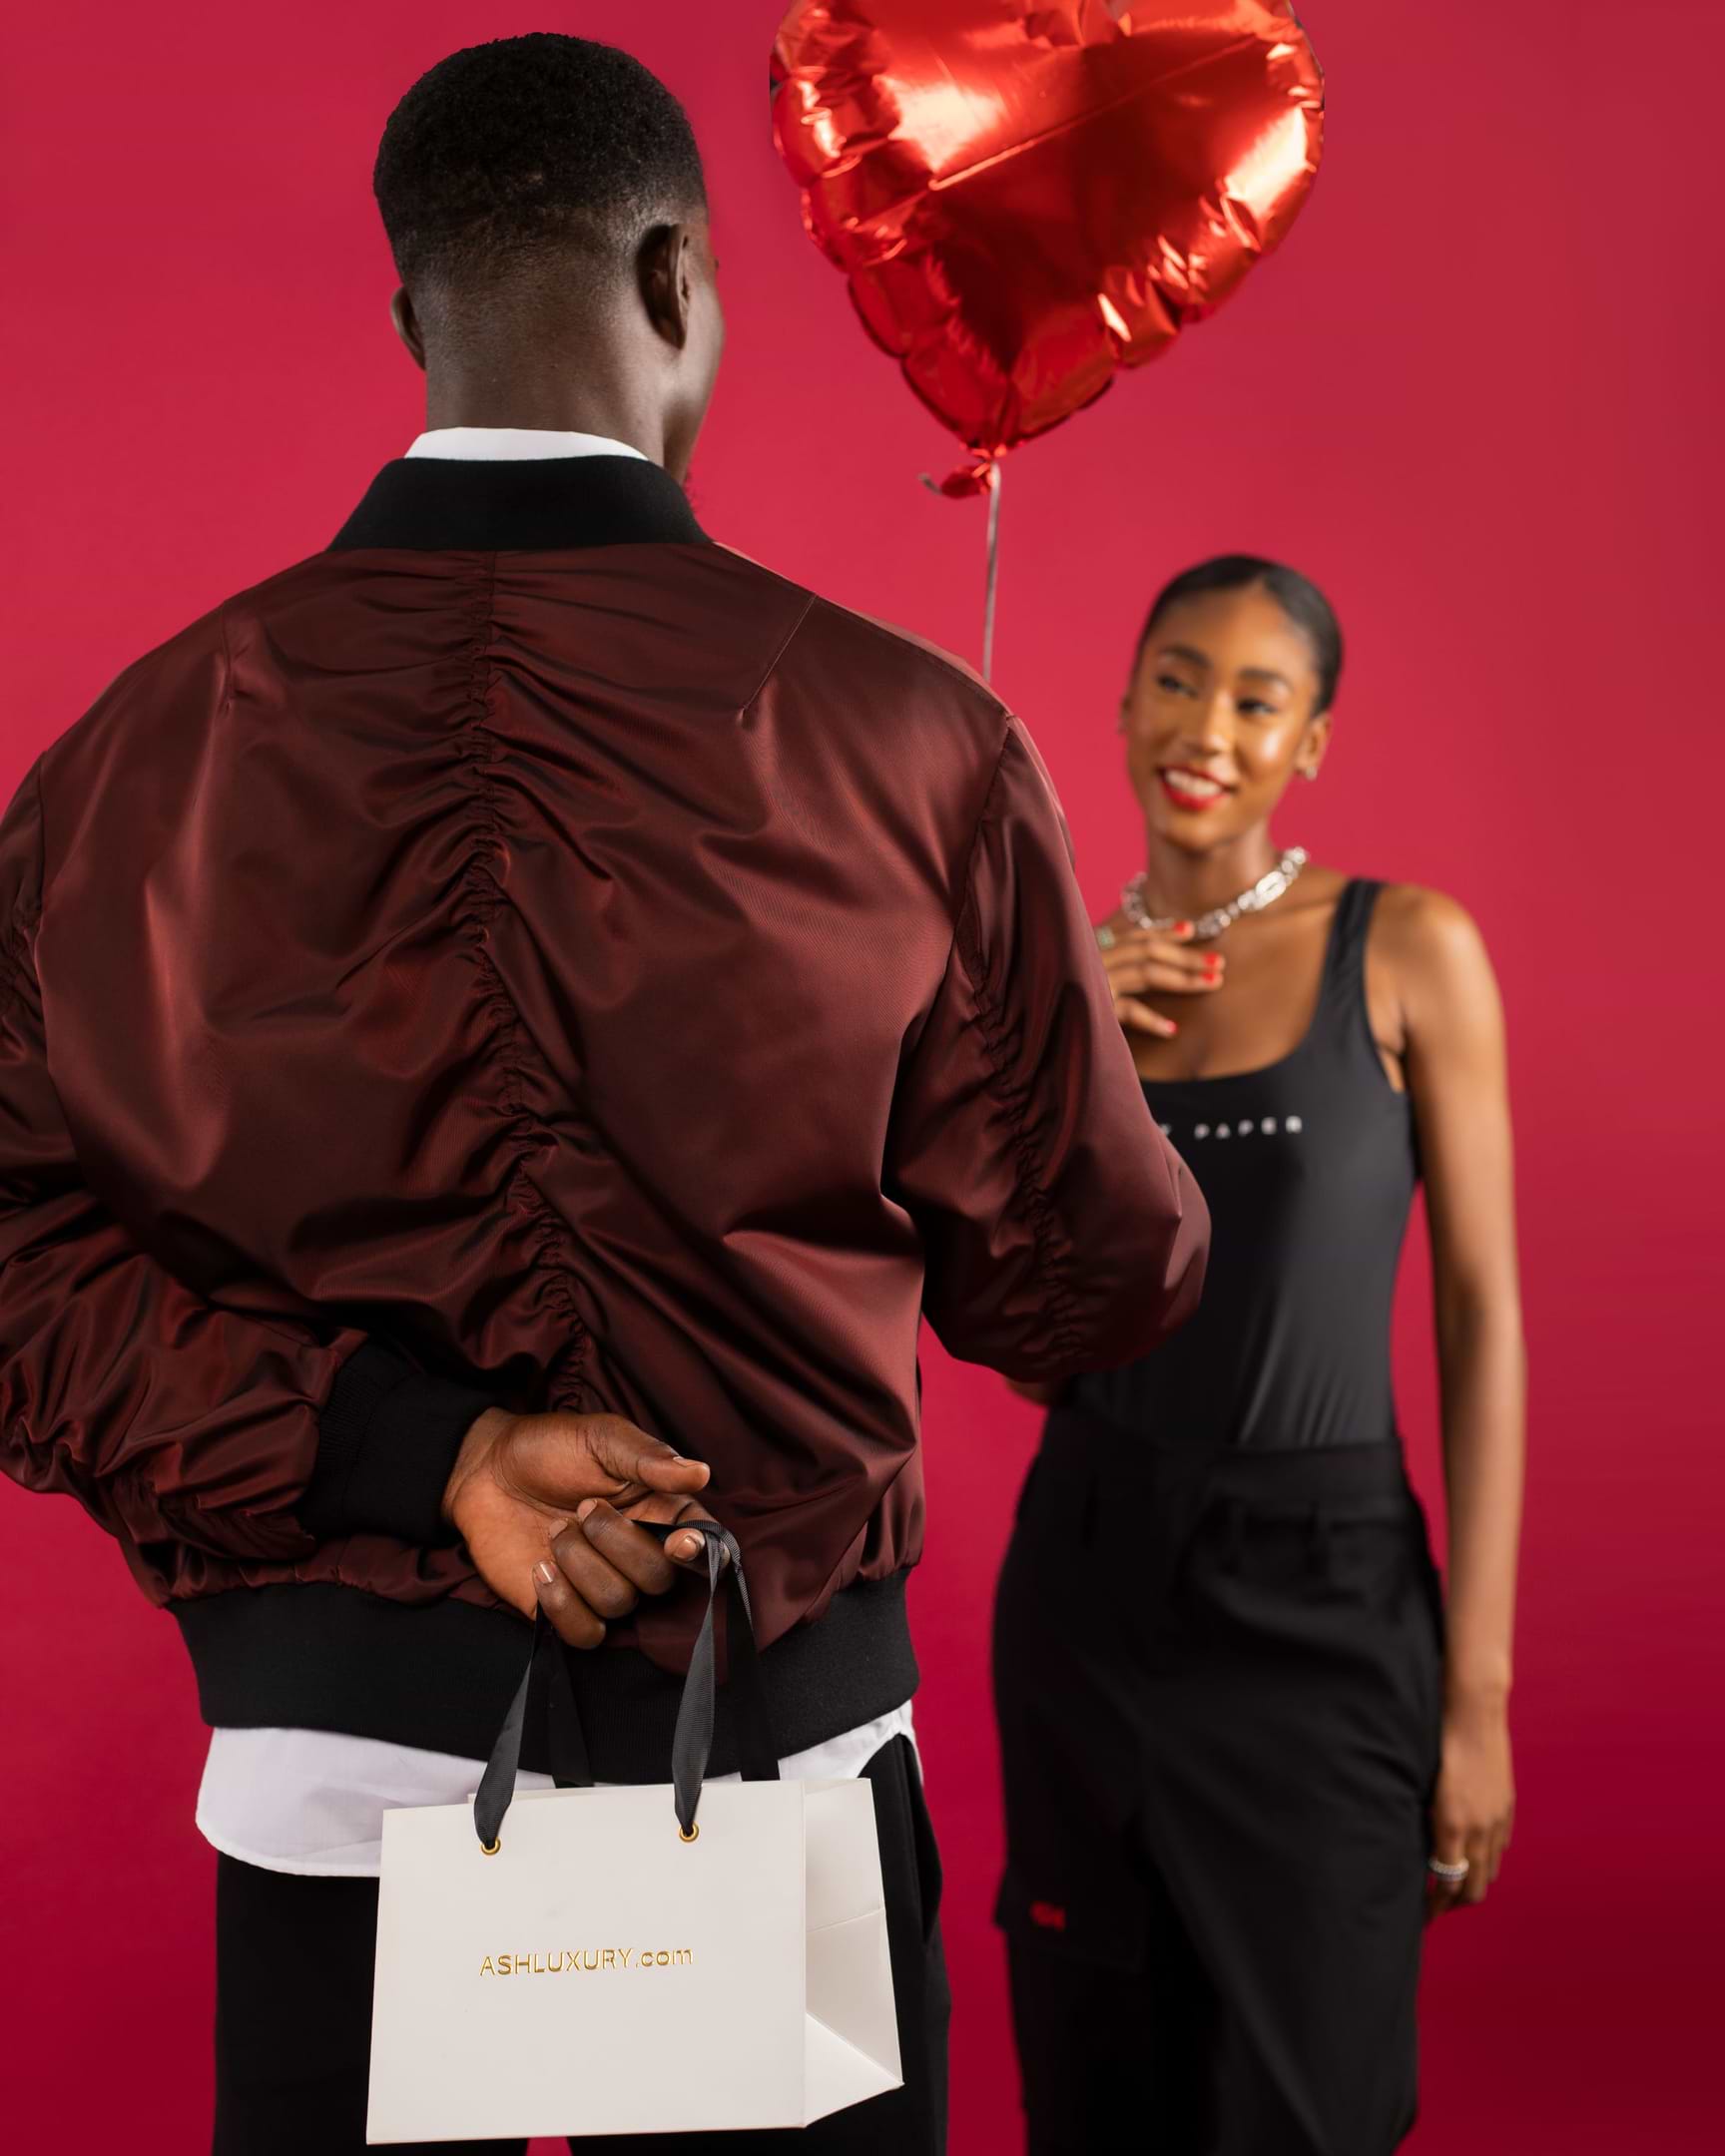 5 Romantic Valentine's Day Ideas For Yourself, Him or Her